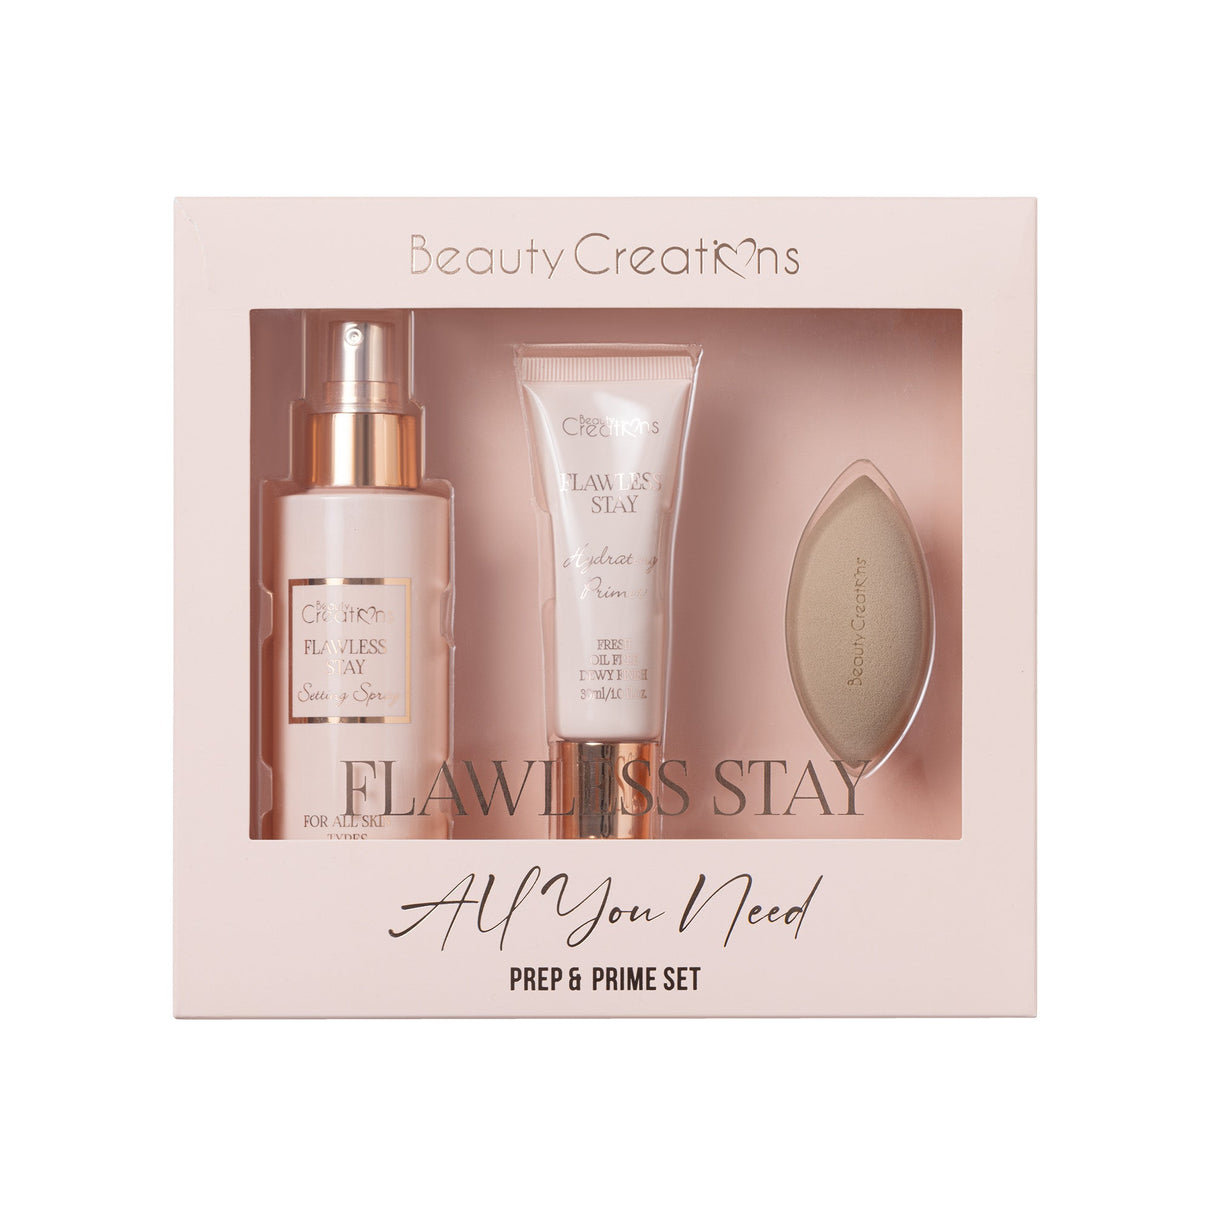 BEAUTY CREATIONS - ALL YOU NEED FLAWLESS STAY PREP & PRIME SET (1PC)